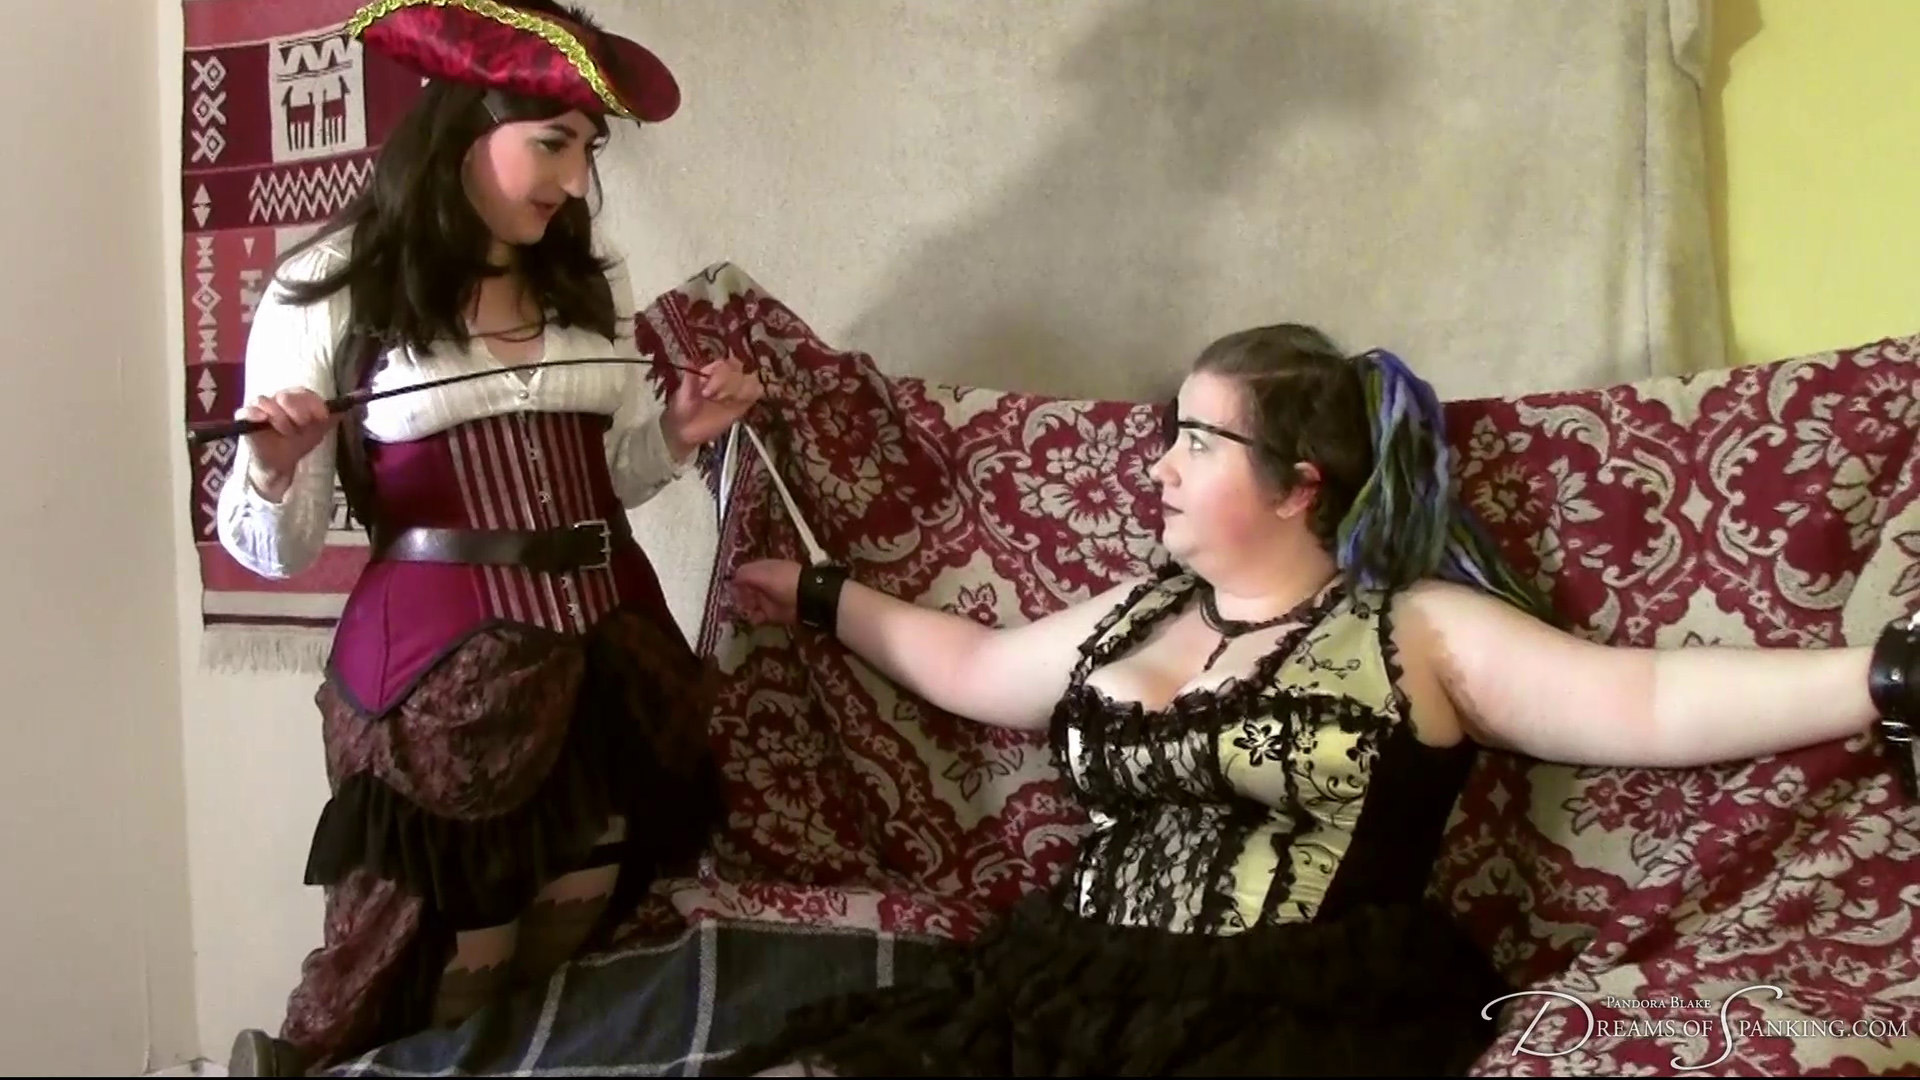 Dreams-of-Spanking_captured-pirate-queen006.jpg